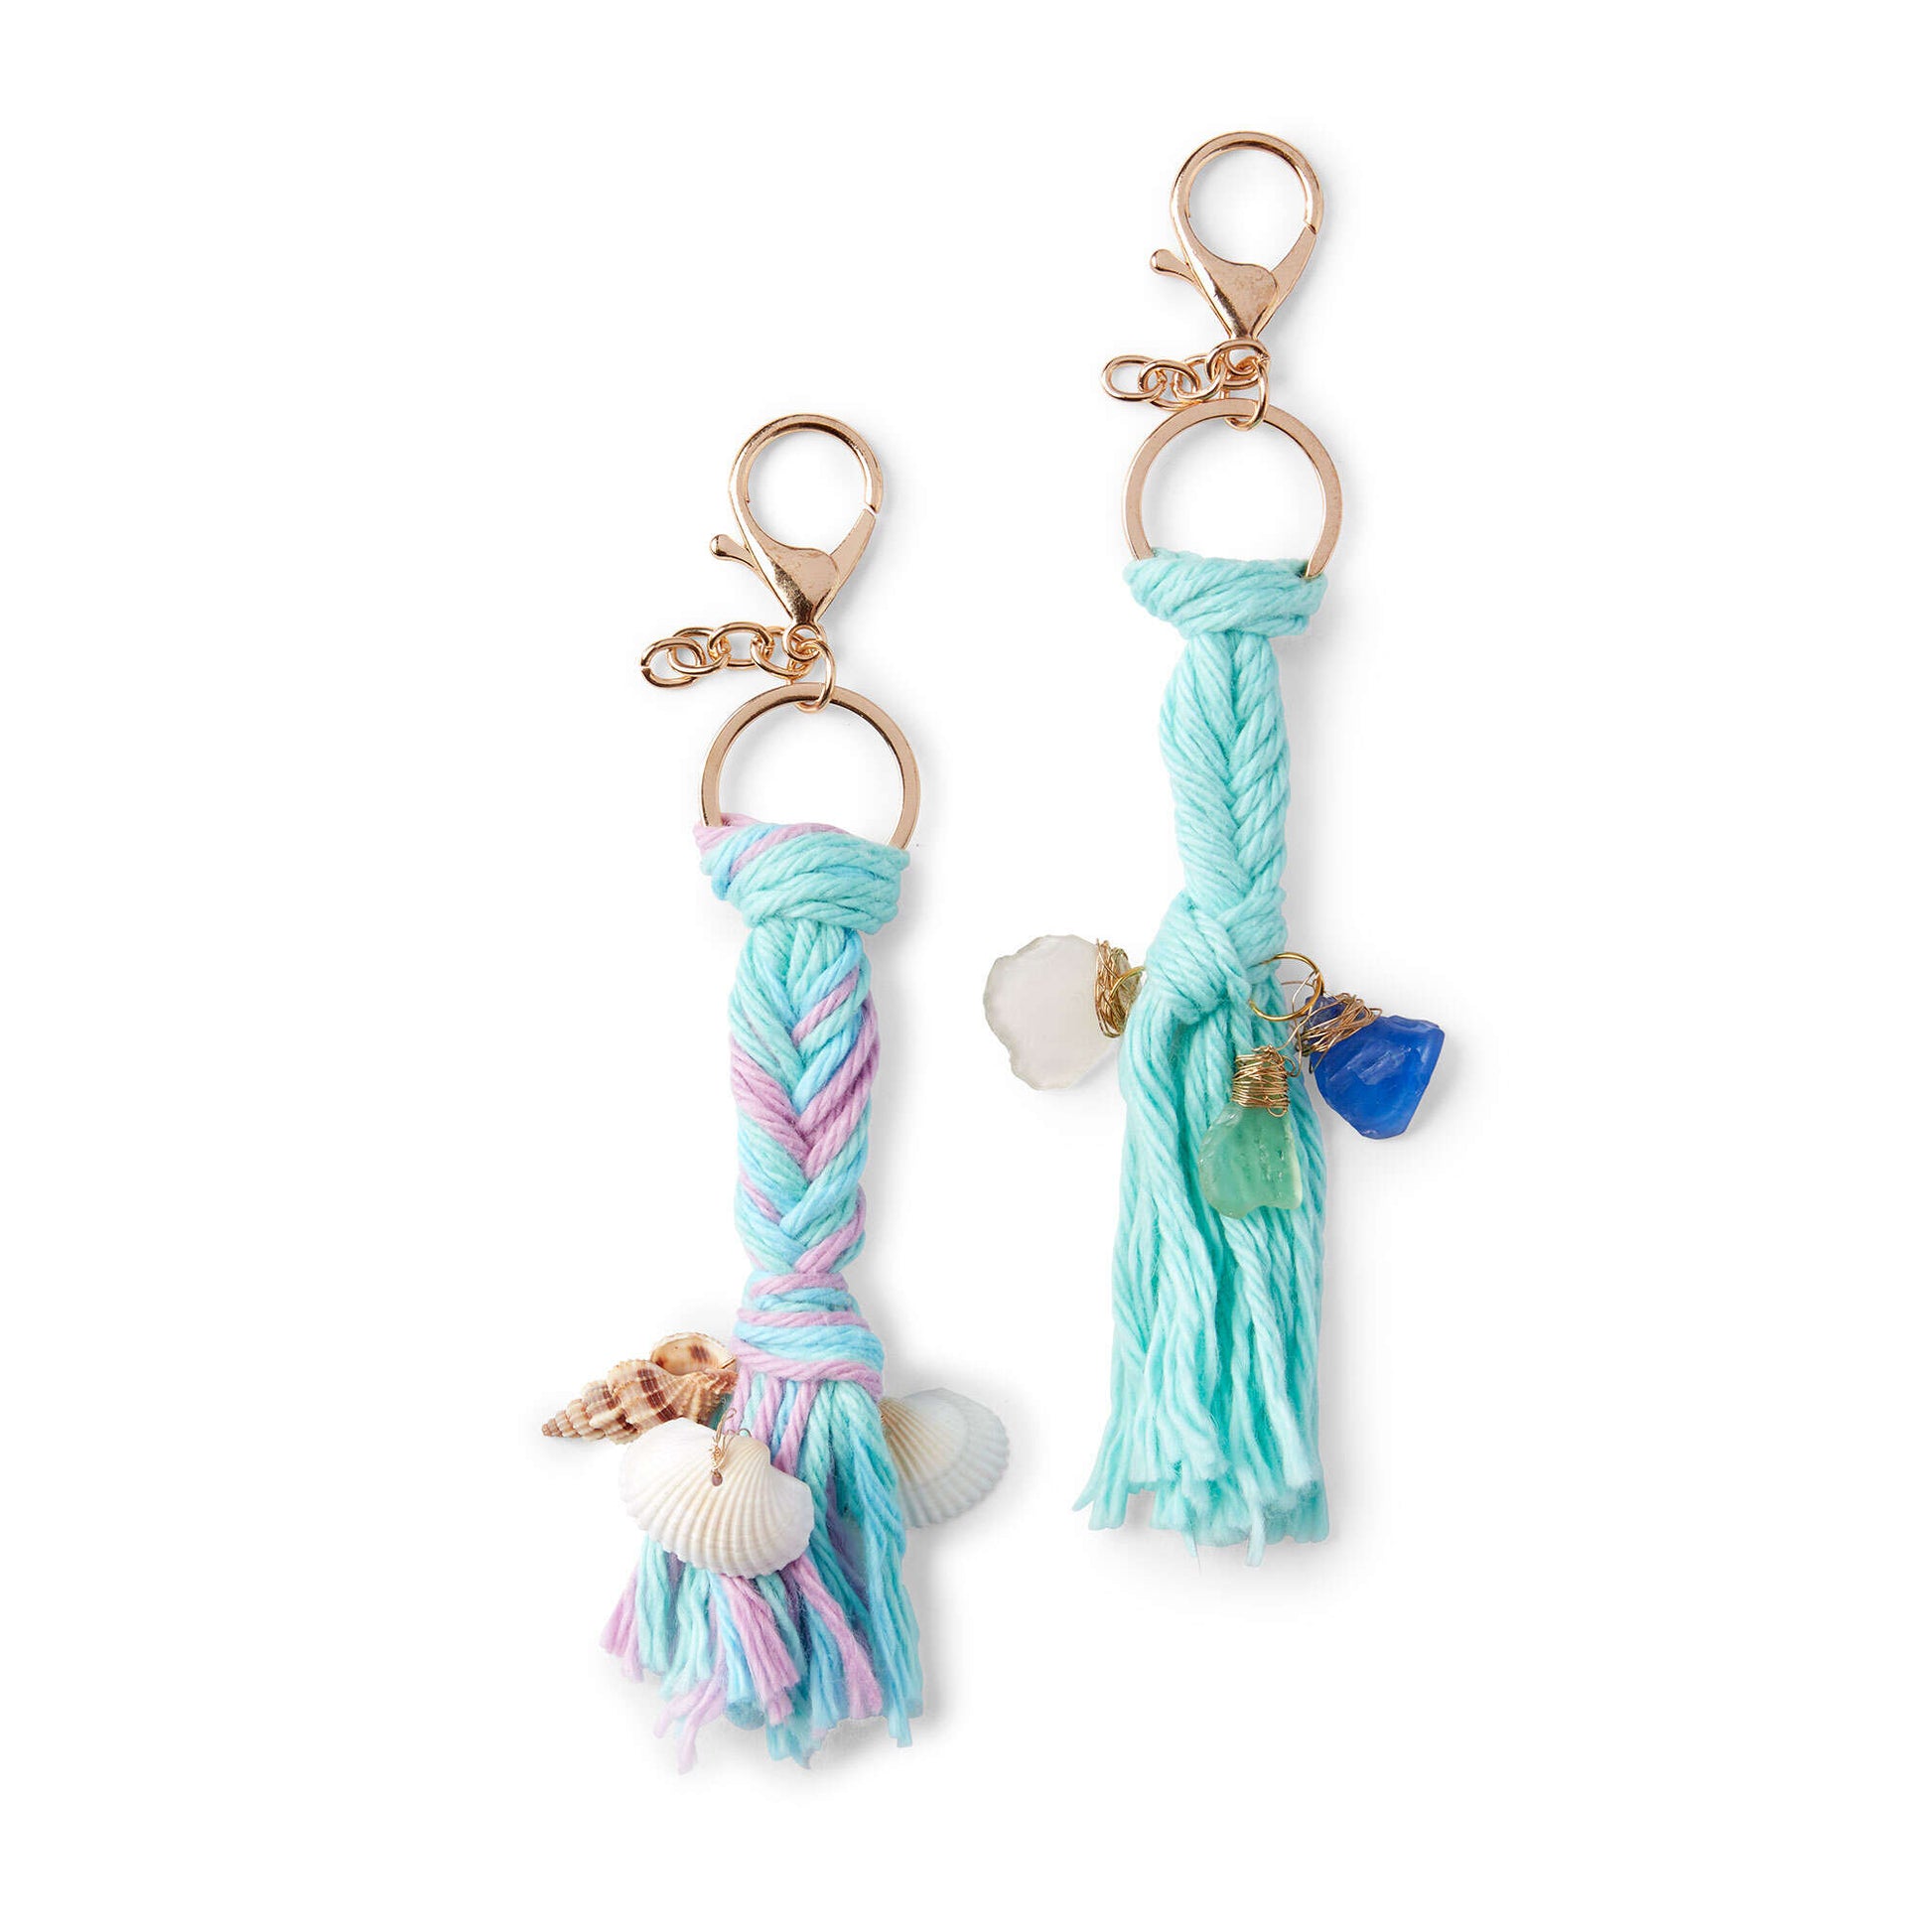 Free Red Heart Mermaid Tails Keychains Craft Pattern